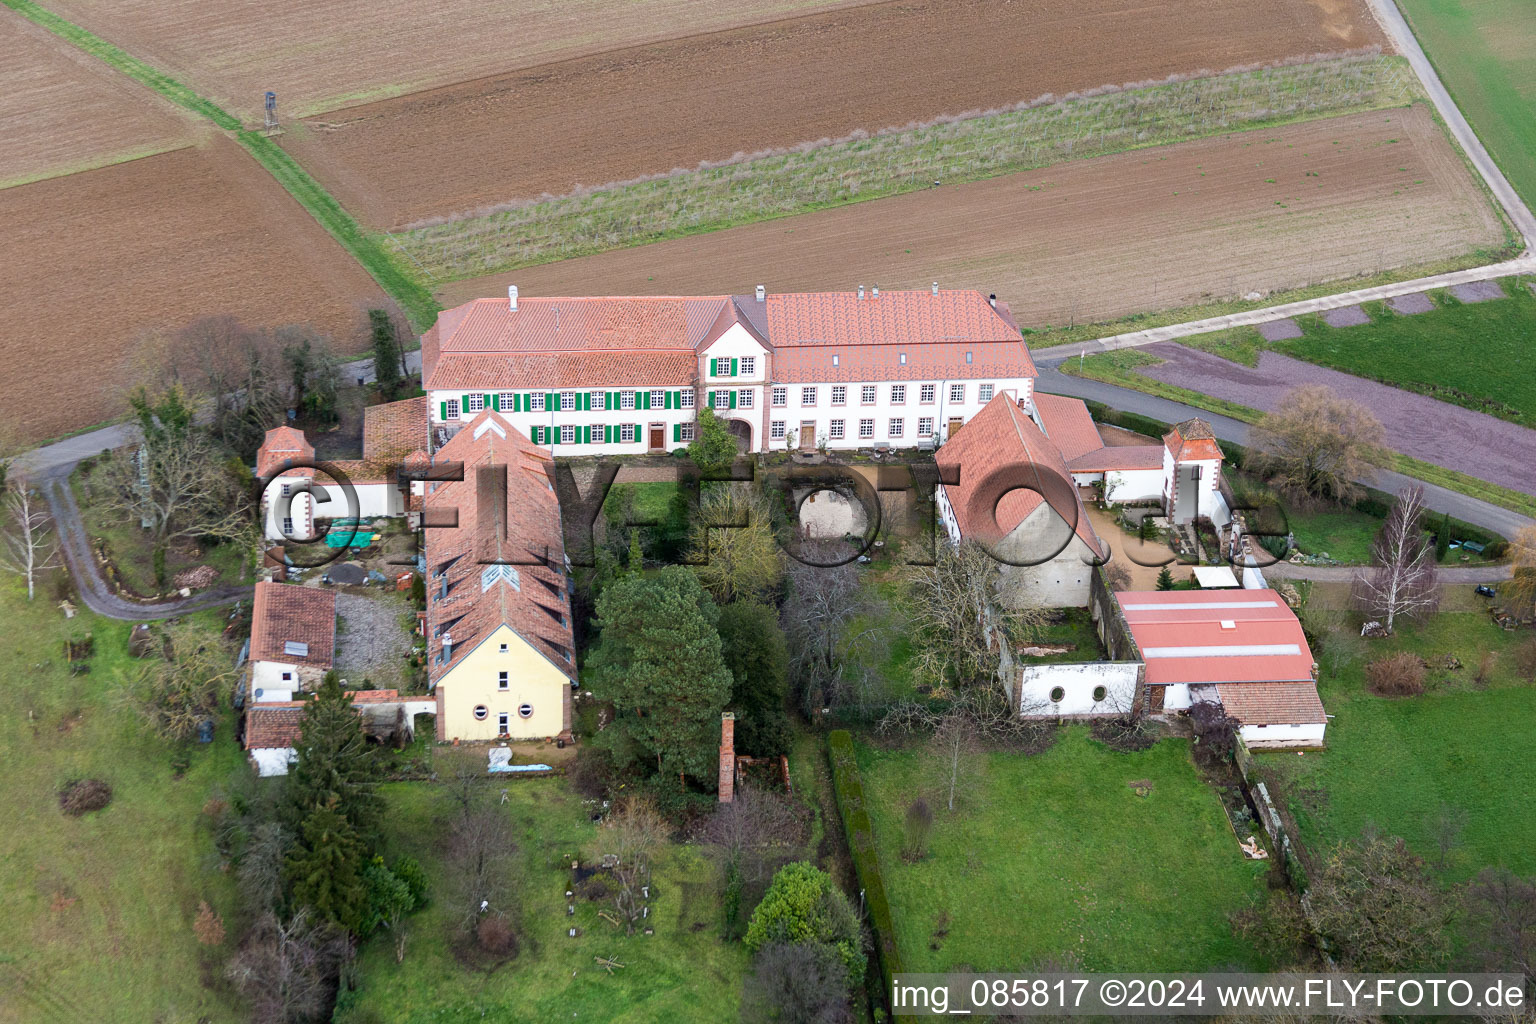 Workshop for Assisted Living of hidden Talents GmbH in the district Haftelhof in Schweighofen in the state Rhineland-Palatinate, Germany seen from a drone